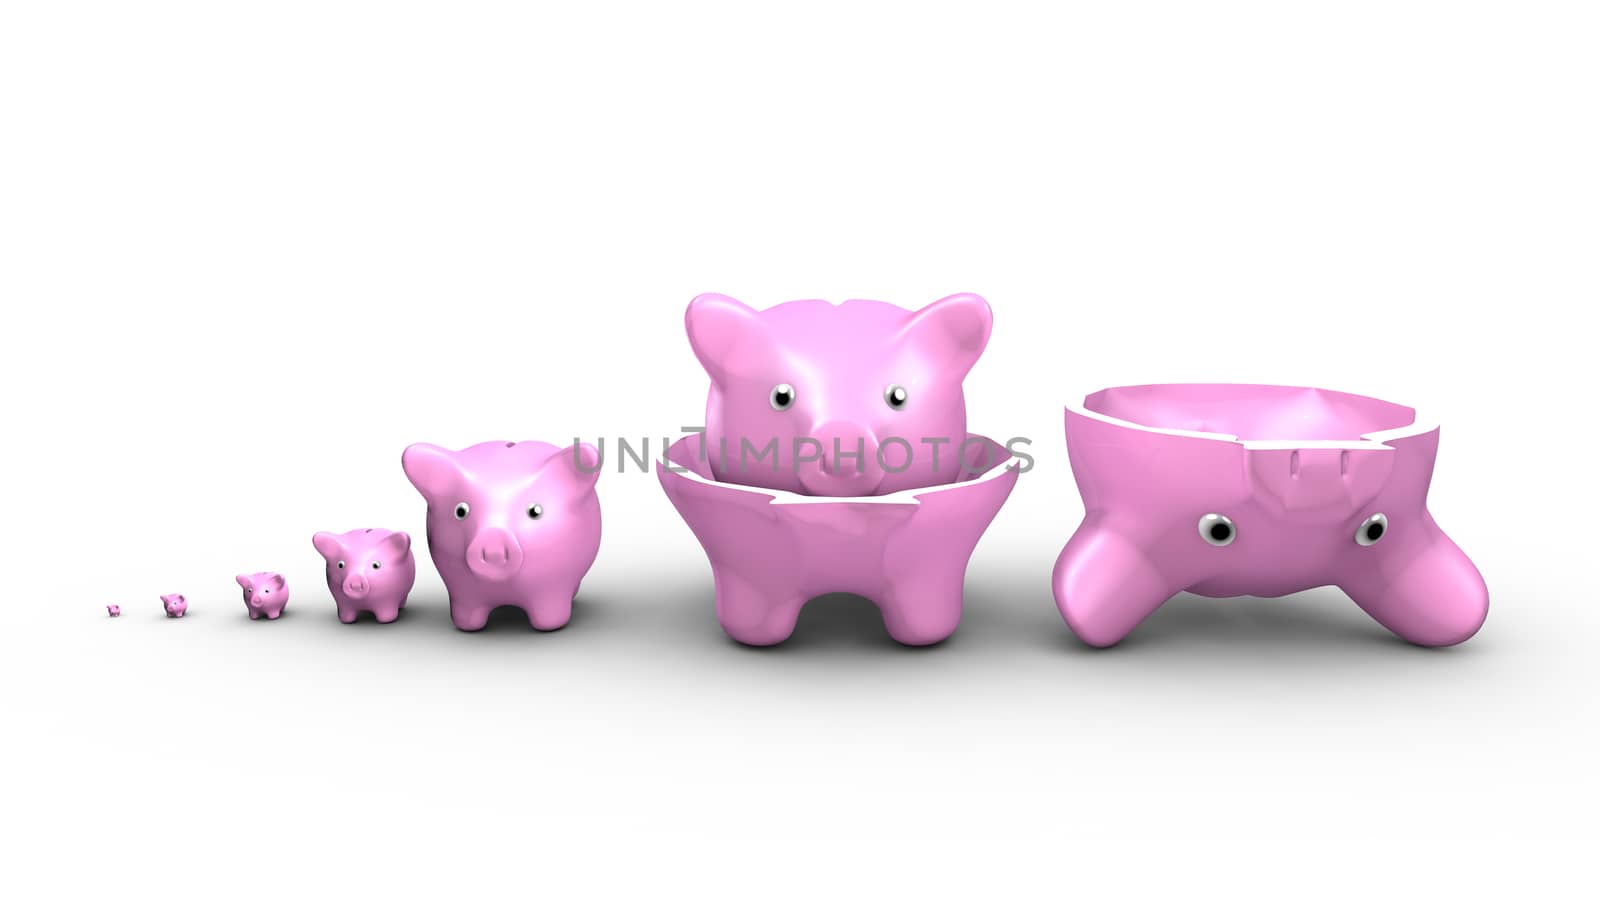 Saving money concept. Piggy banks replace the Russian dolls. by ytjo